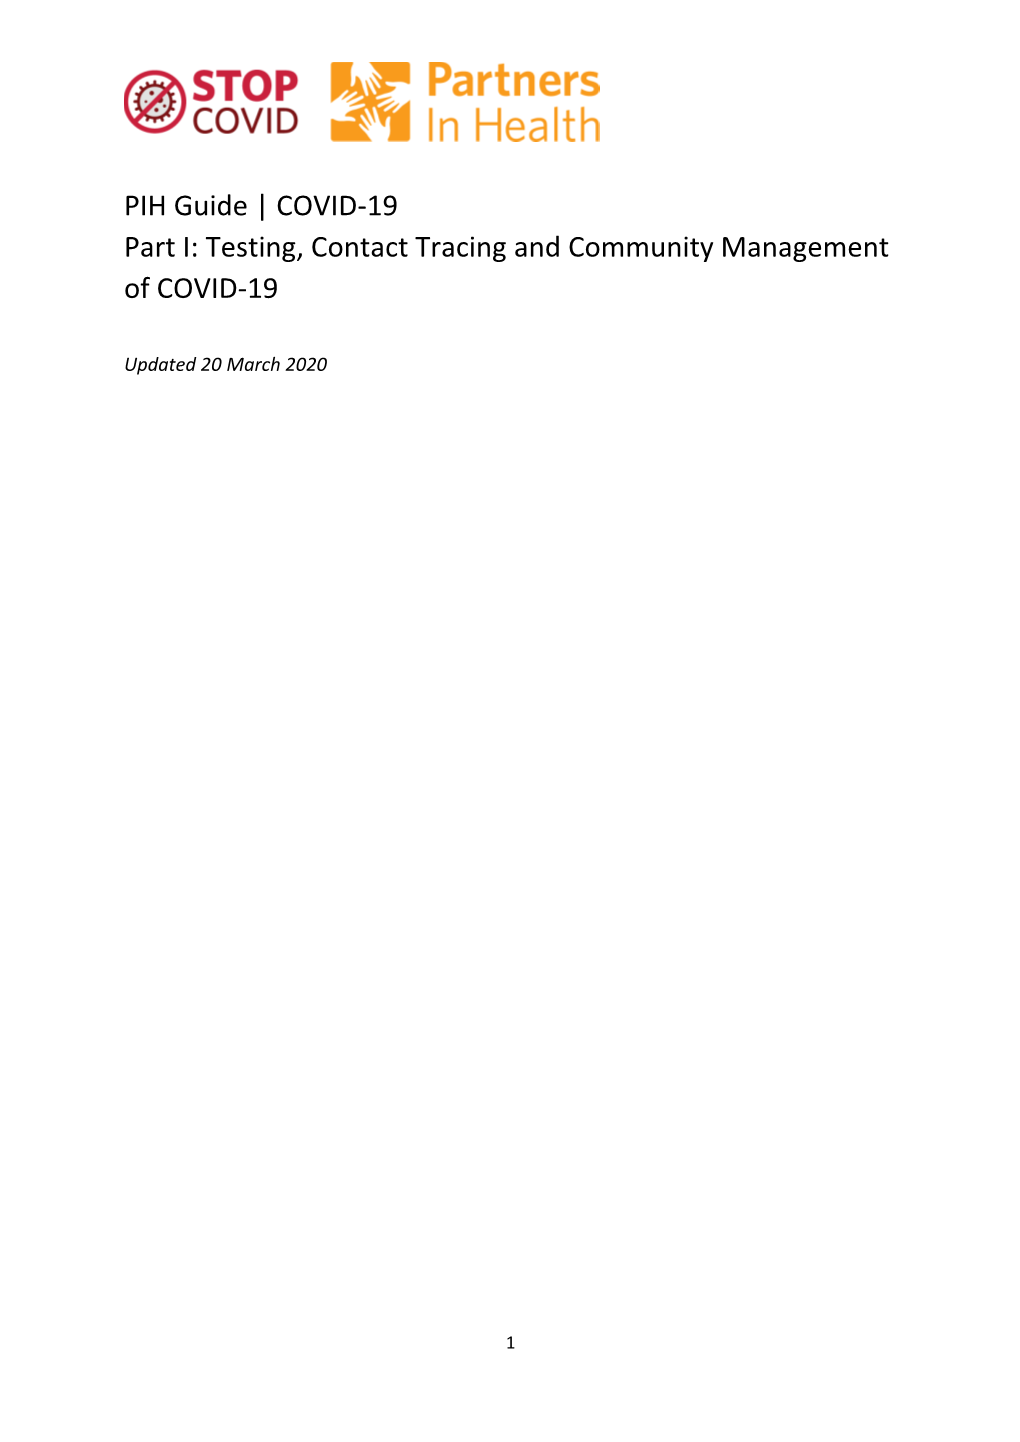 PIH Guide | COVID-19 Part I: Testing, Contact Tracing and Community Management of COVID-19